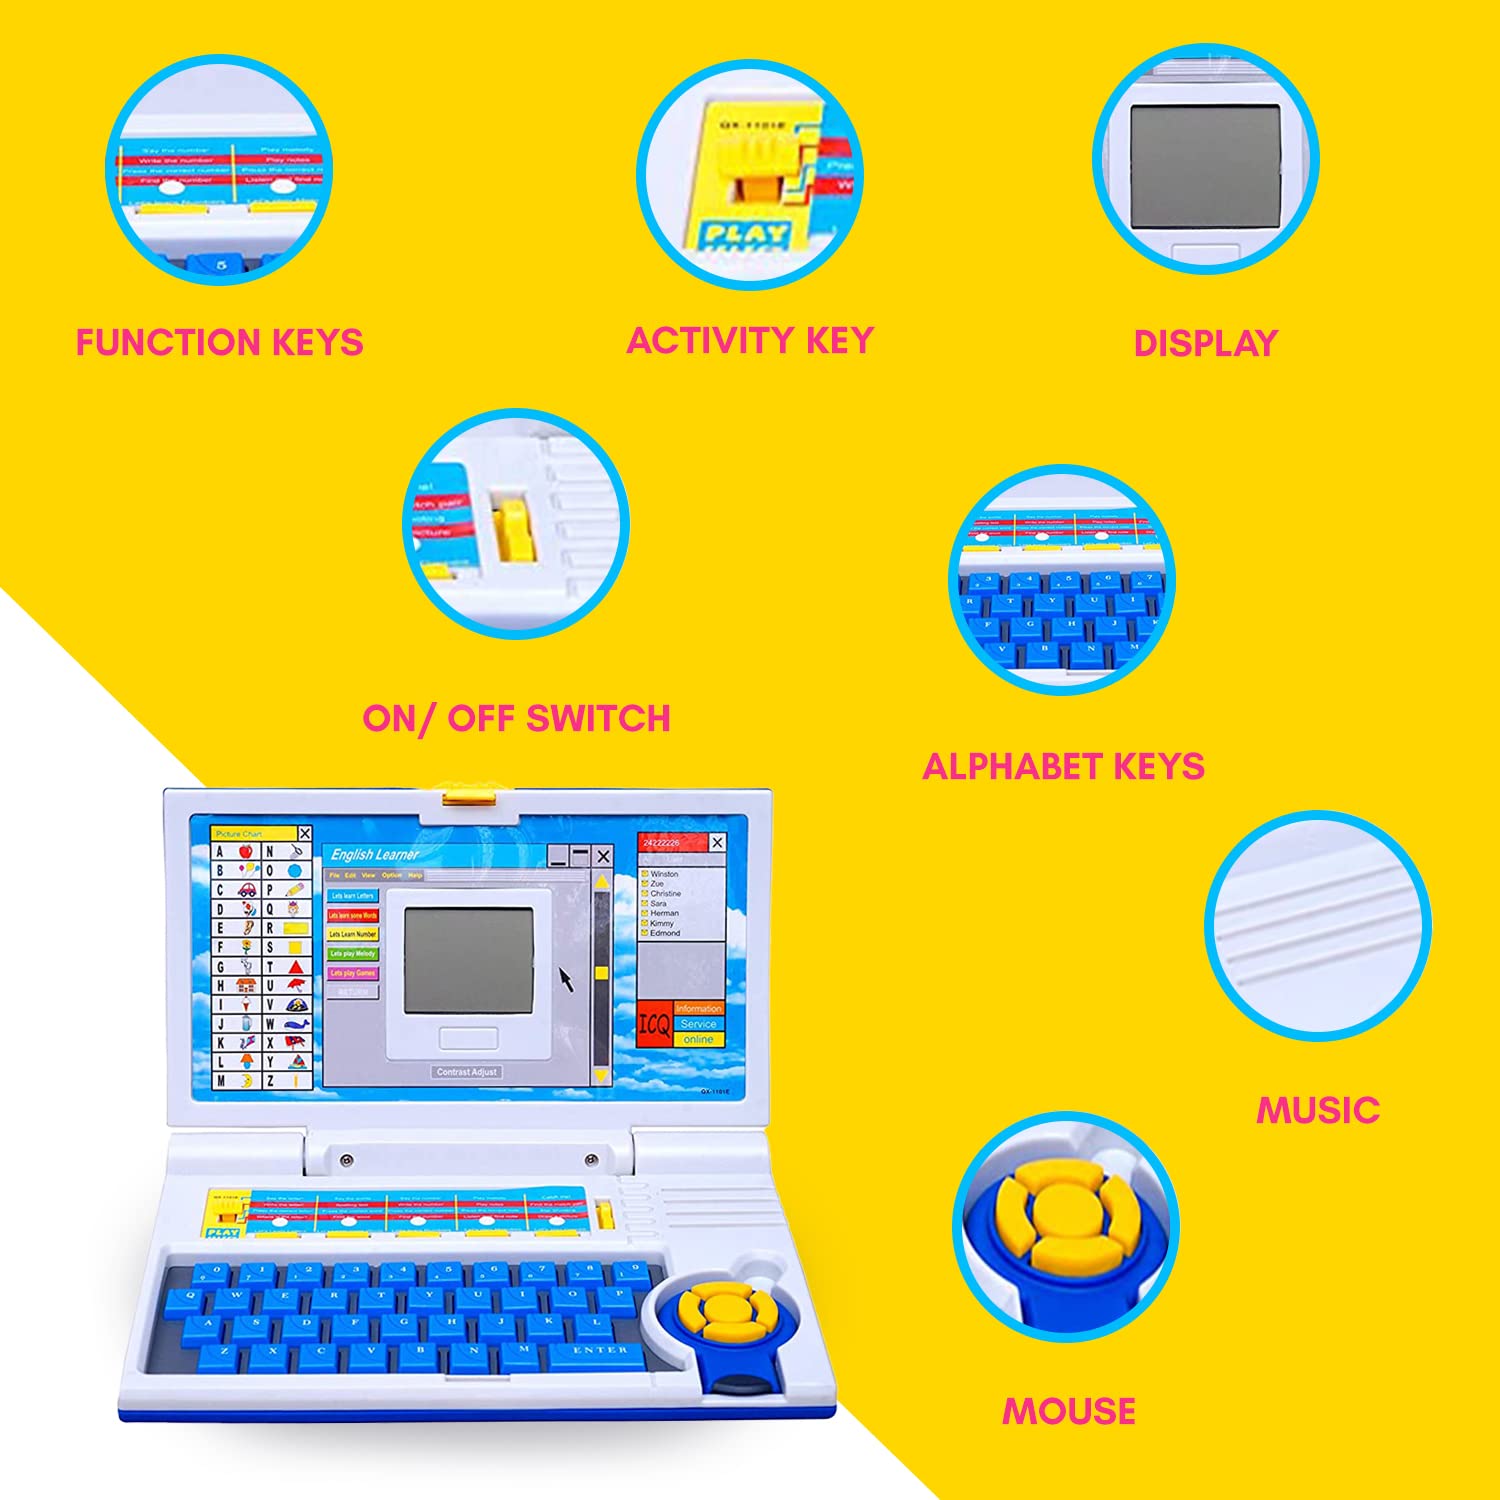 Educational English Educational and Learning Mode Laptop Computer for Kids